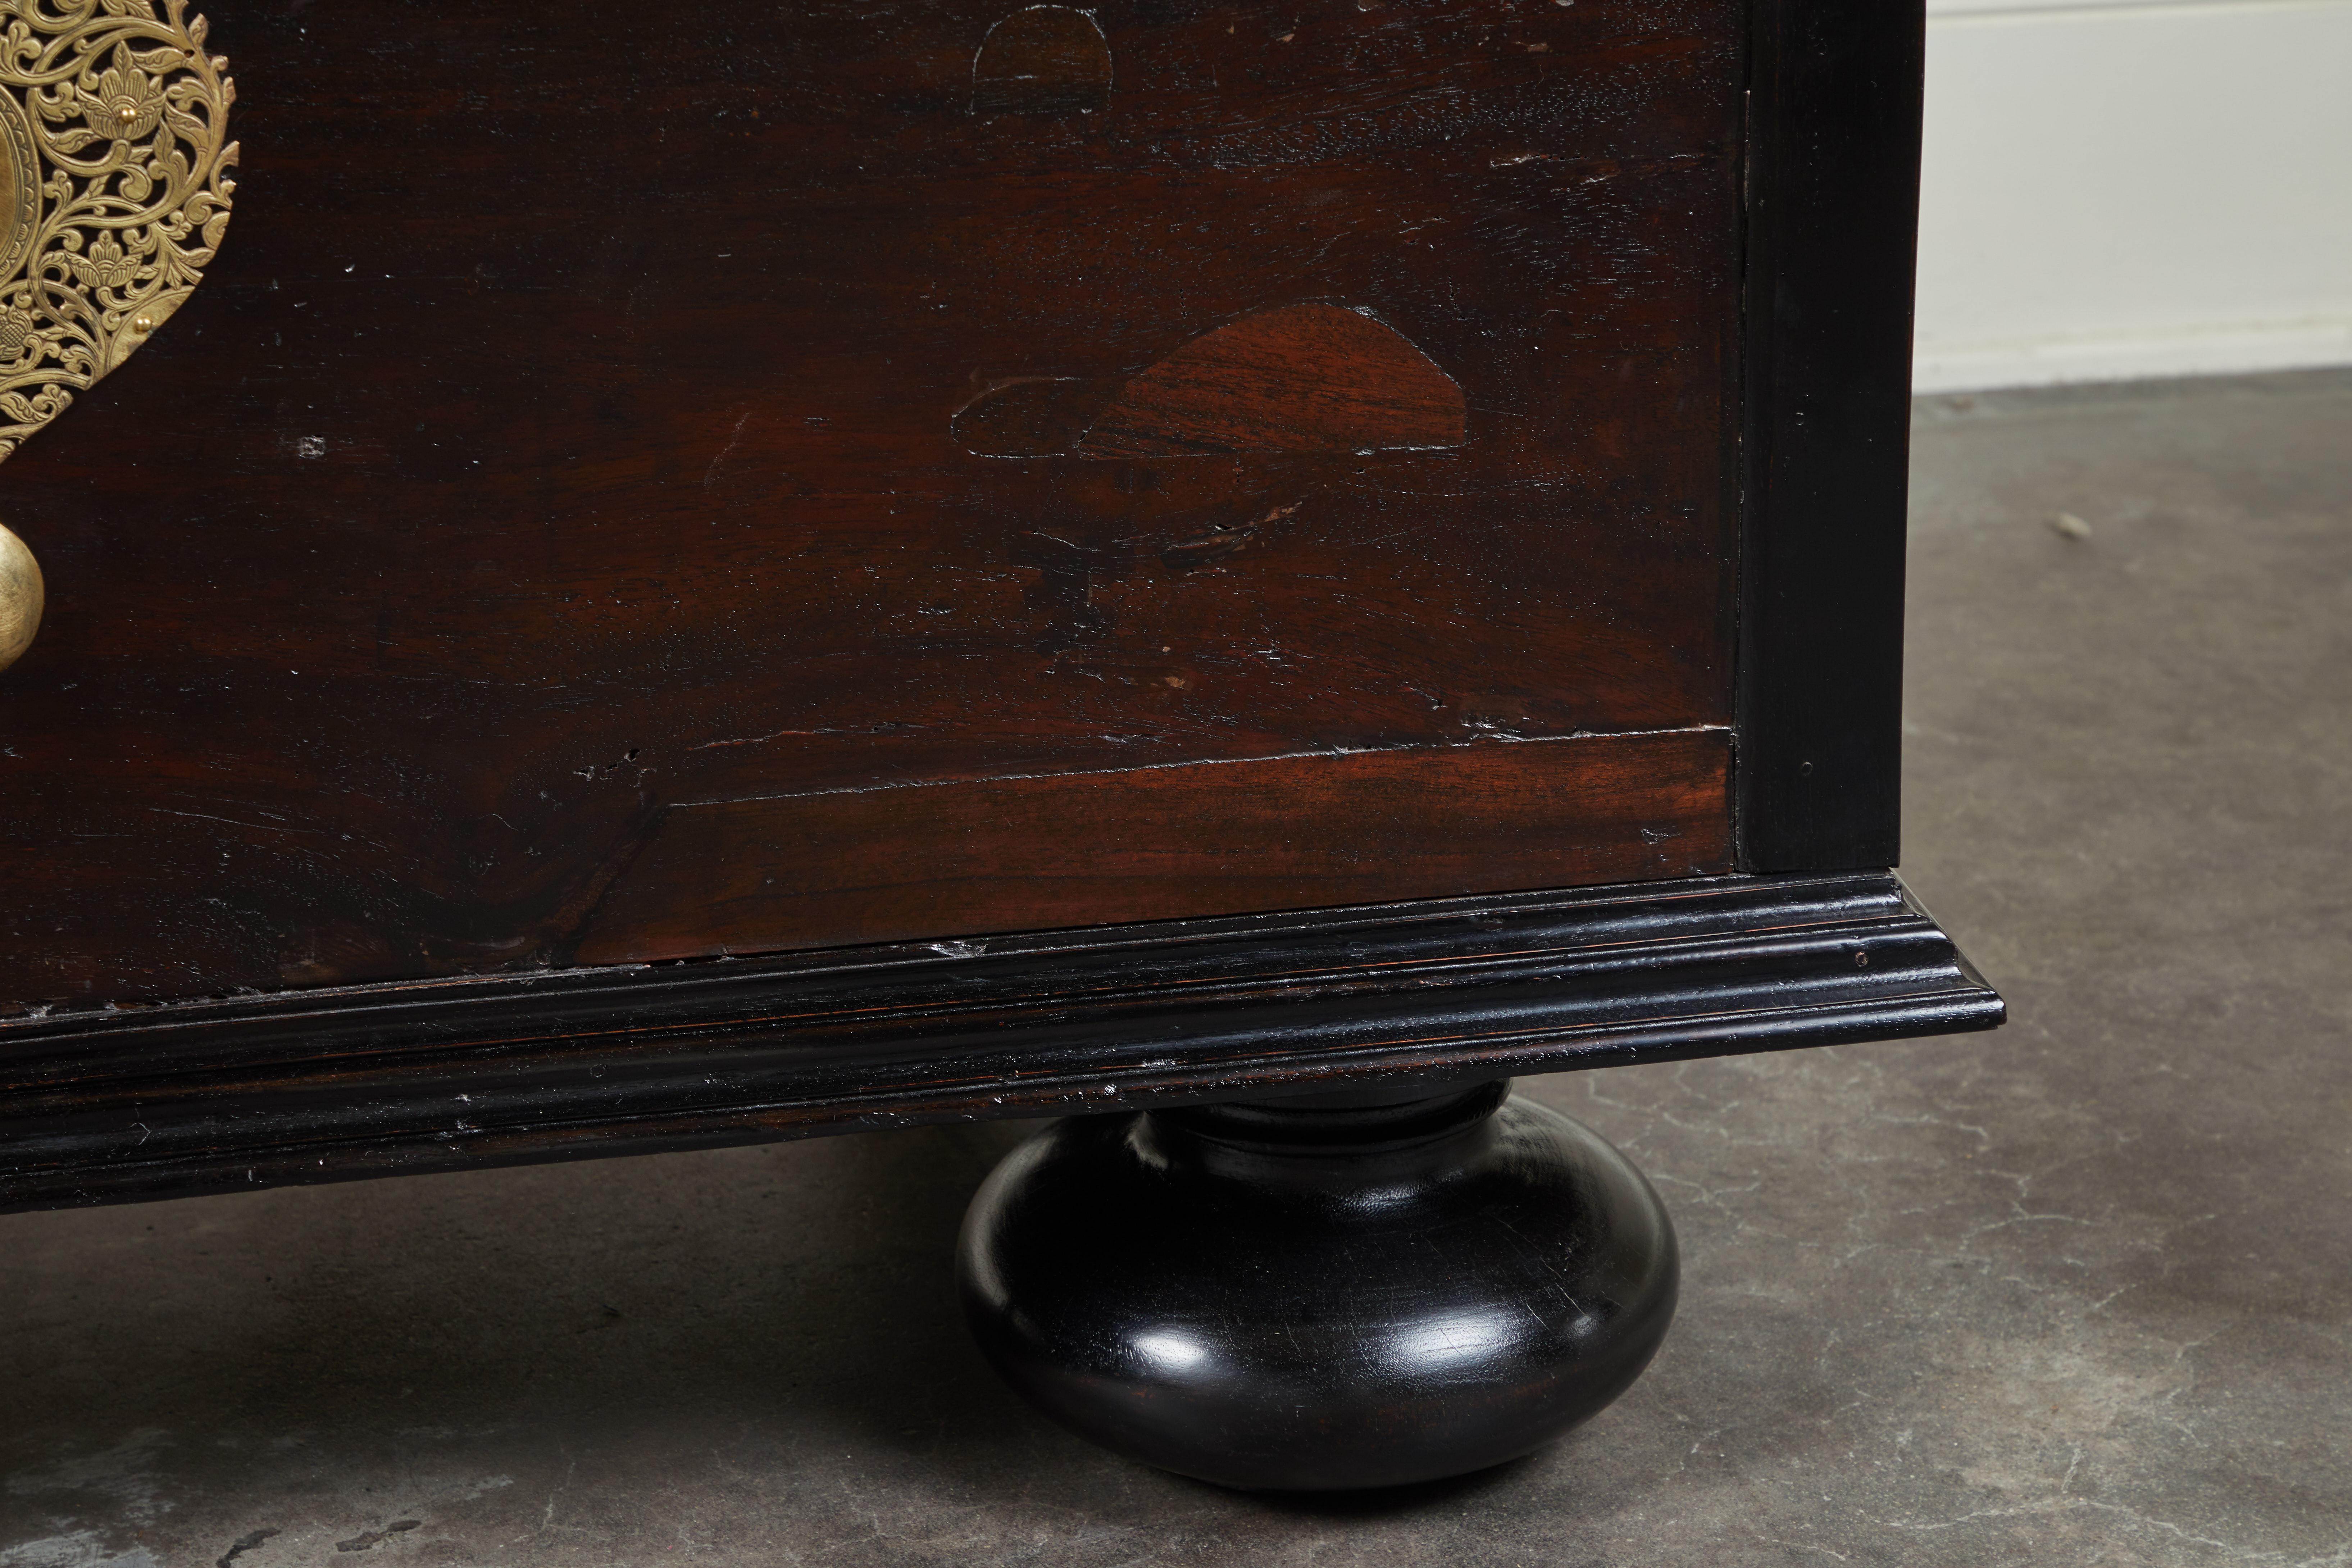 A 19th century Sri Lankan Trunk made of jakwood with ebony trim. Bright hardware and handles on squat feet.